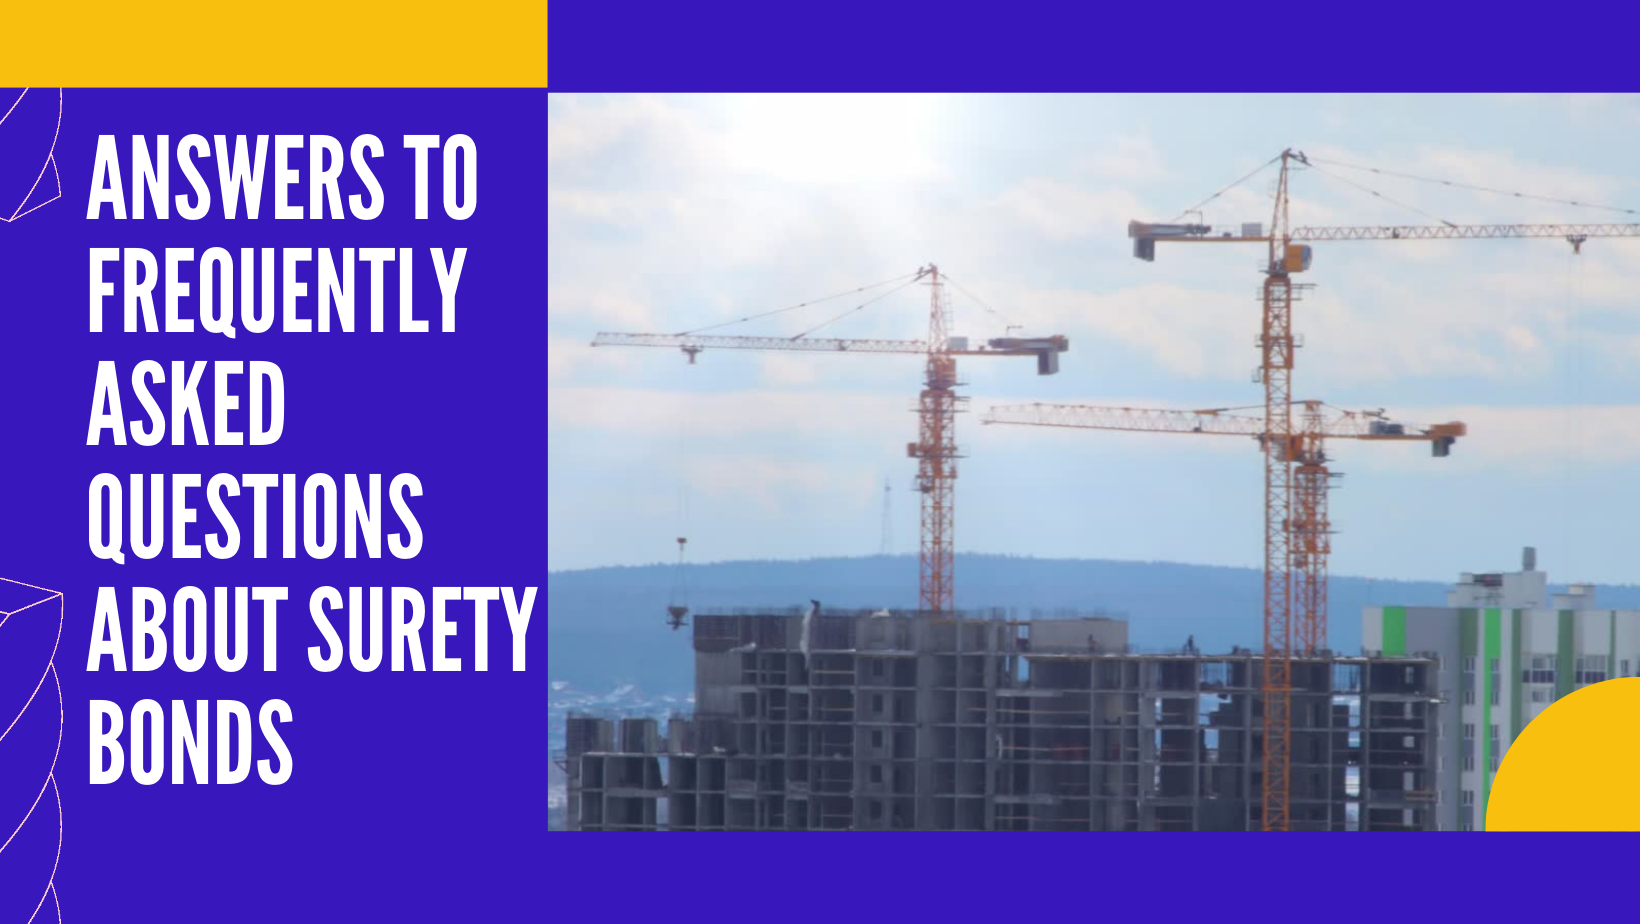 surety bond - what is the meaning of surety bond - construction of building in blue background